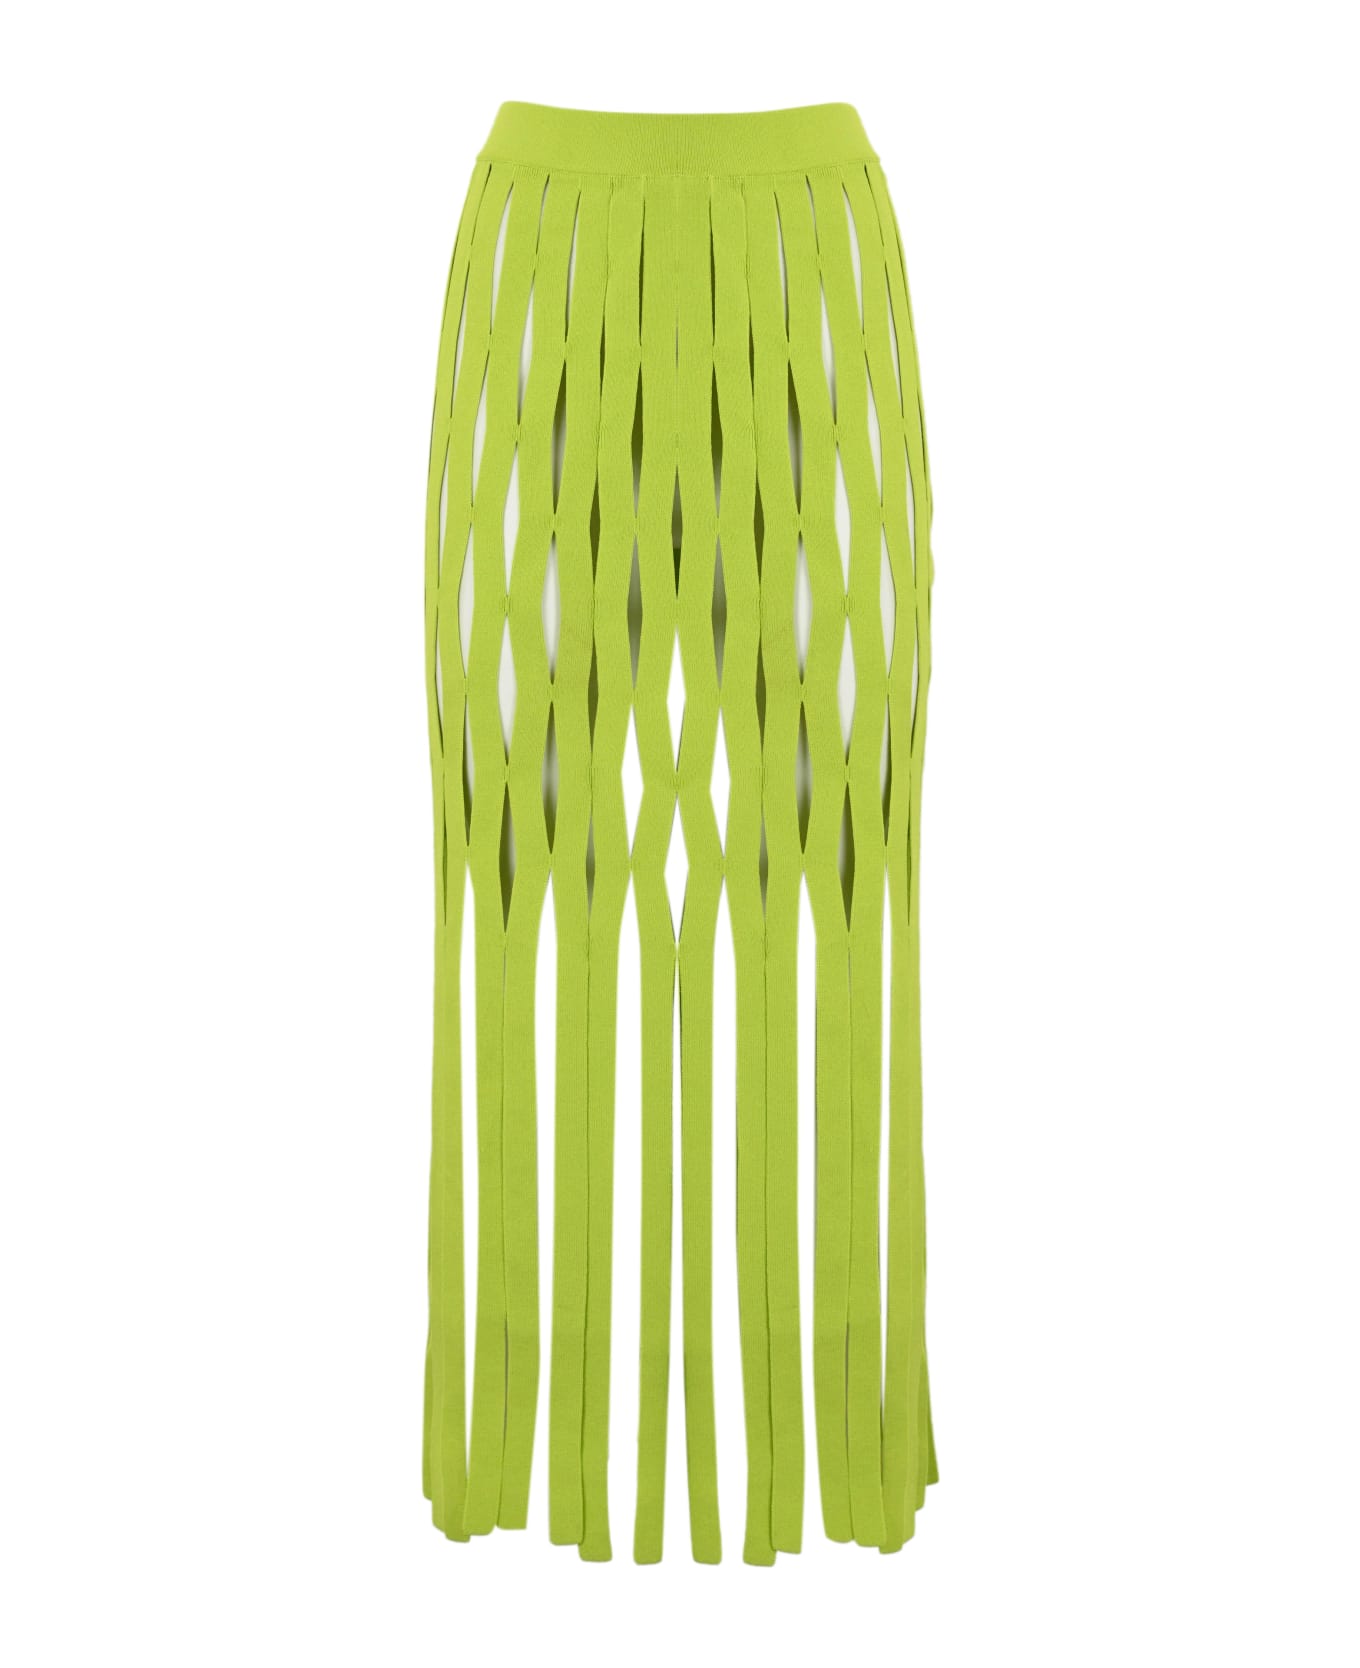 Liviana Conti Viscose Skirt With Ribbons - Cyber lime スカート